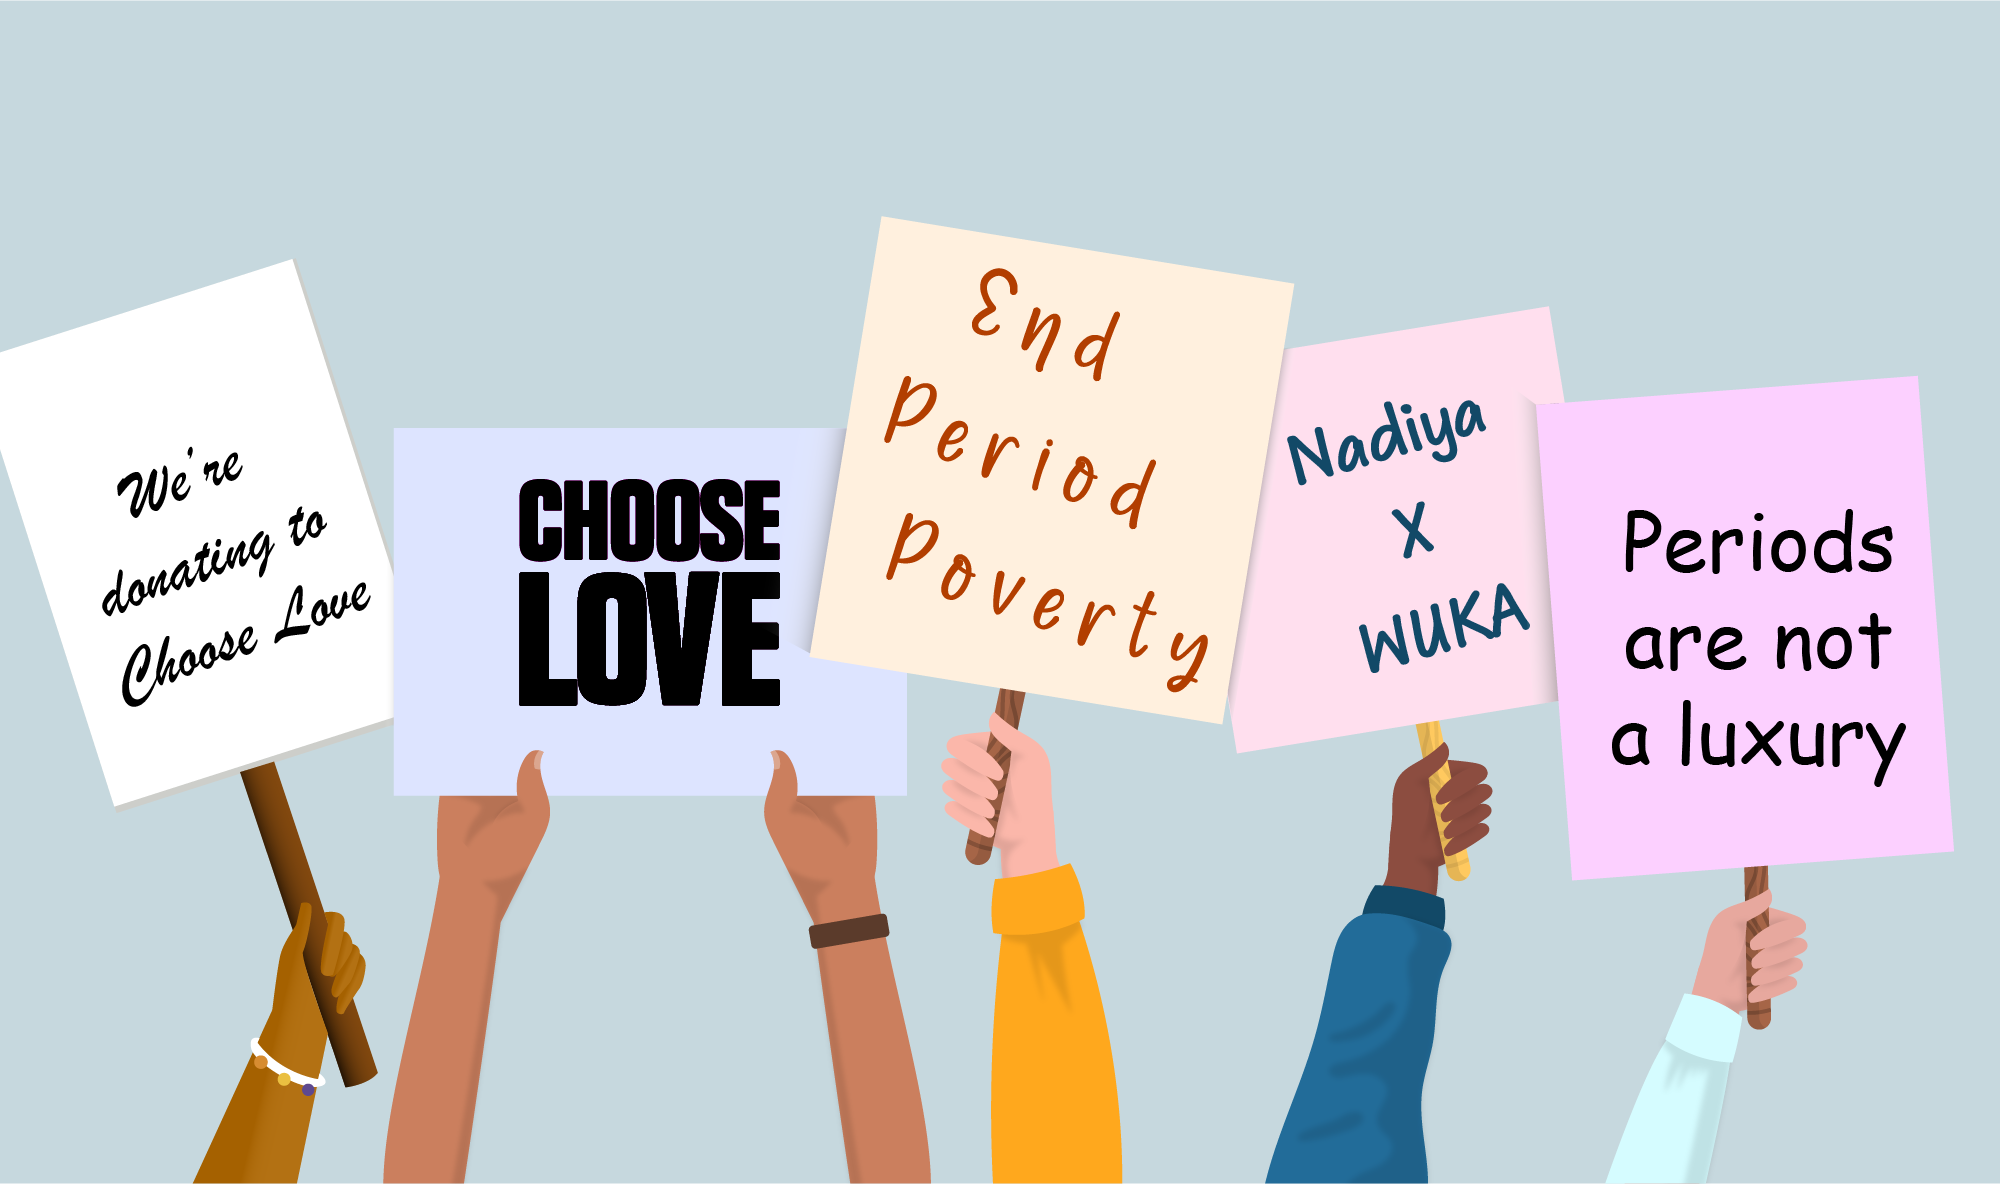 Nadiya x WUKA - periods should not be a luxury, so for every order placed through this collection we're going to give a pair of our Basics period pants to Choose Love